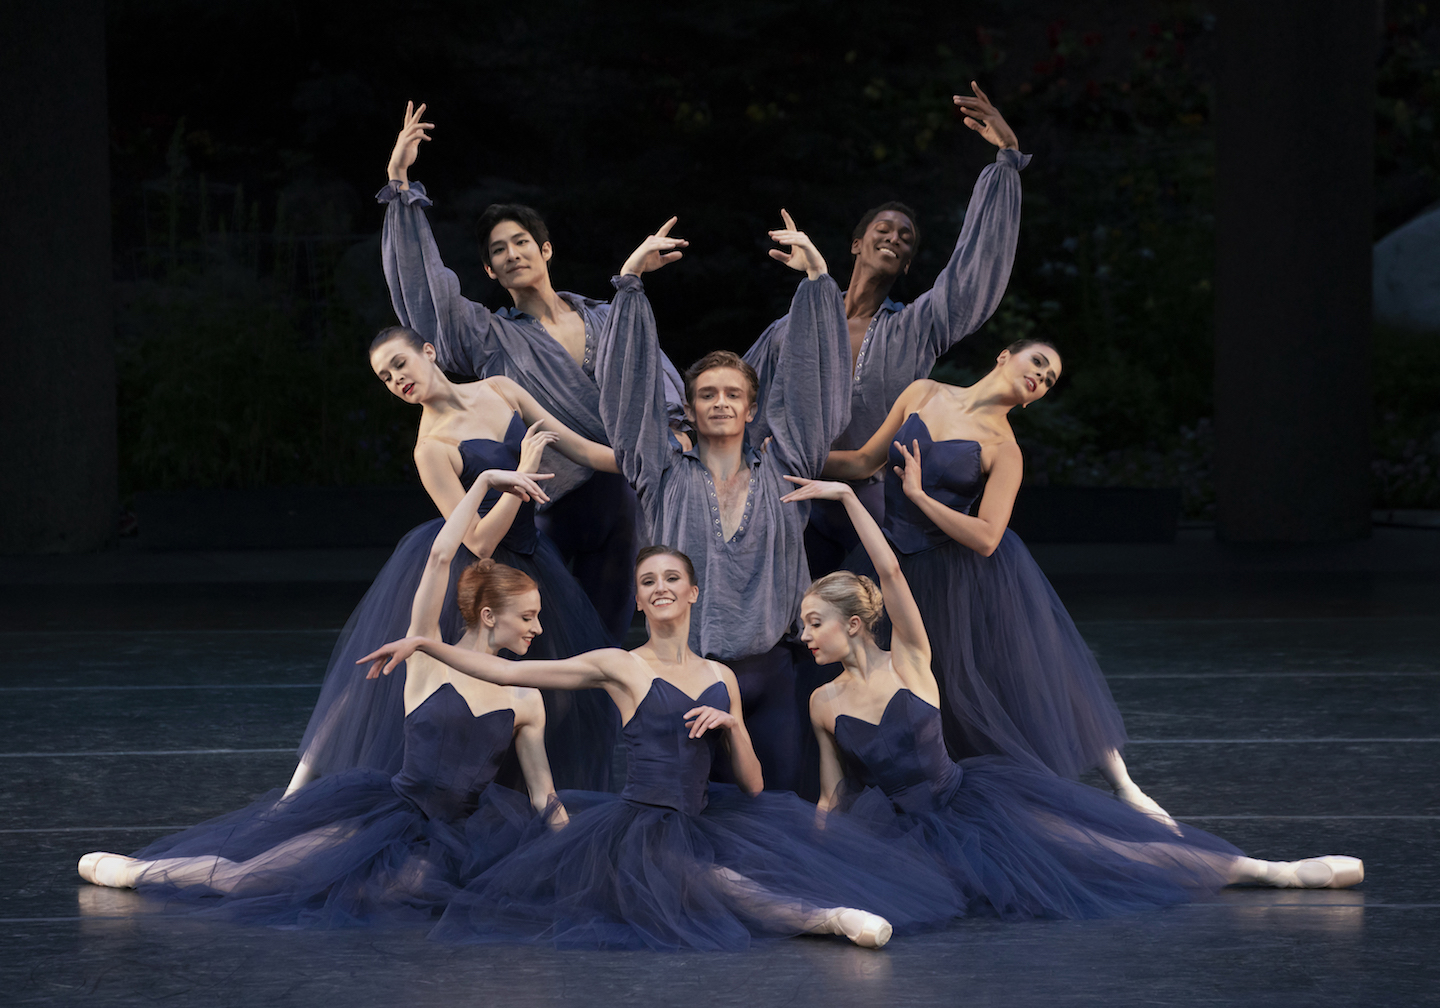 James Whiteside on the American Ballet Theatre and being 